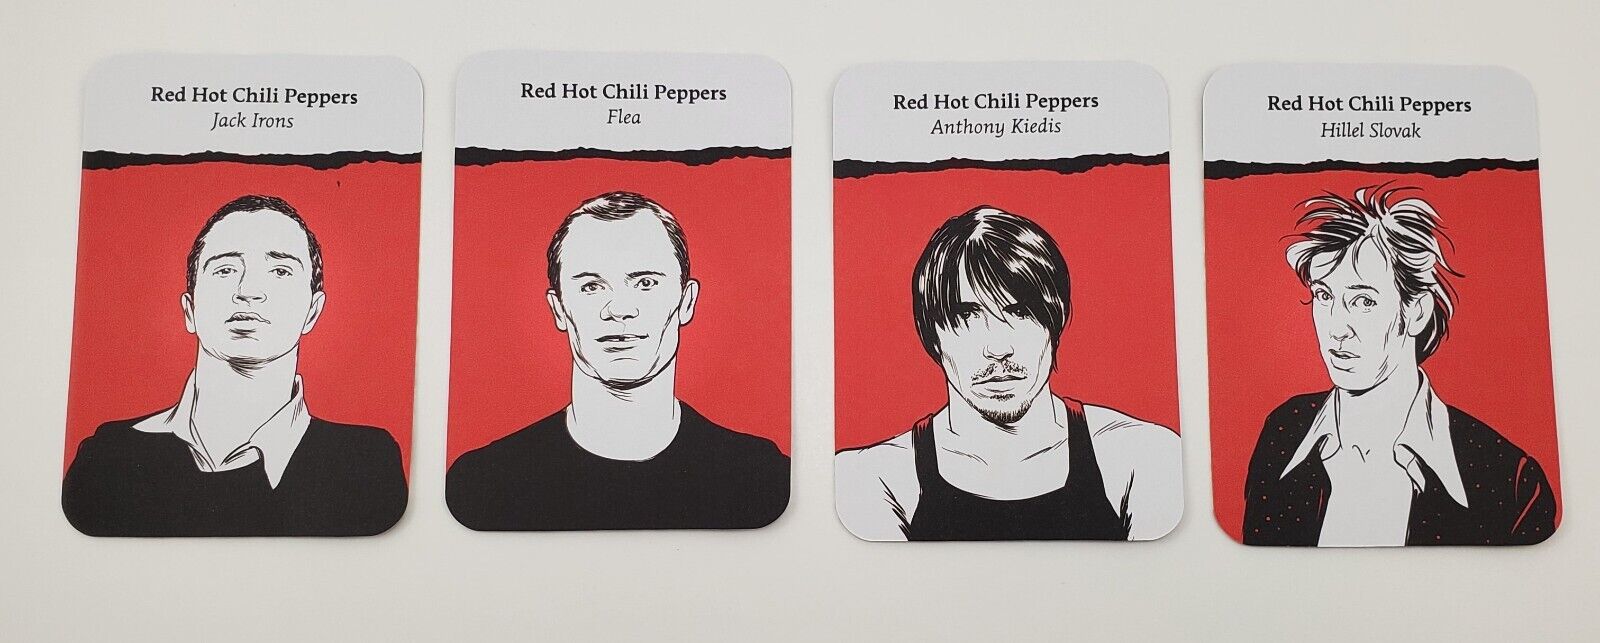 Red Hot Chili Peppers Complete Card Set of 4 Mint 2018 Anthony Kiedis Jack Irons